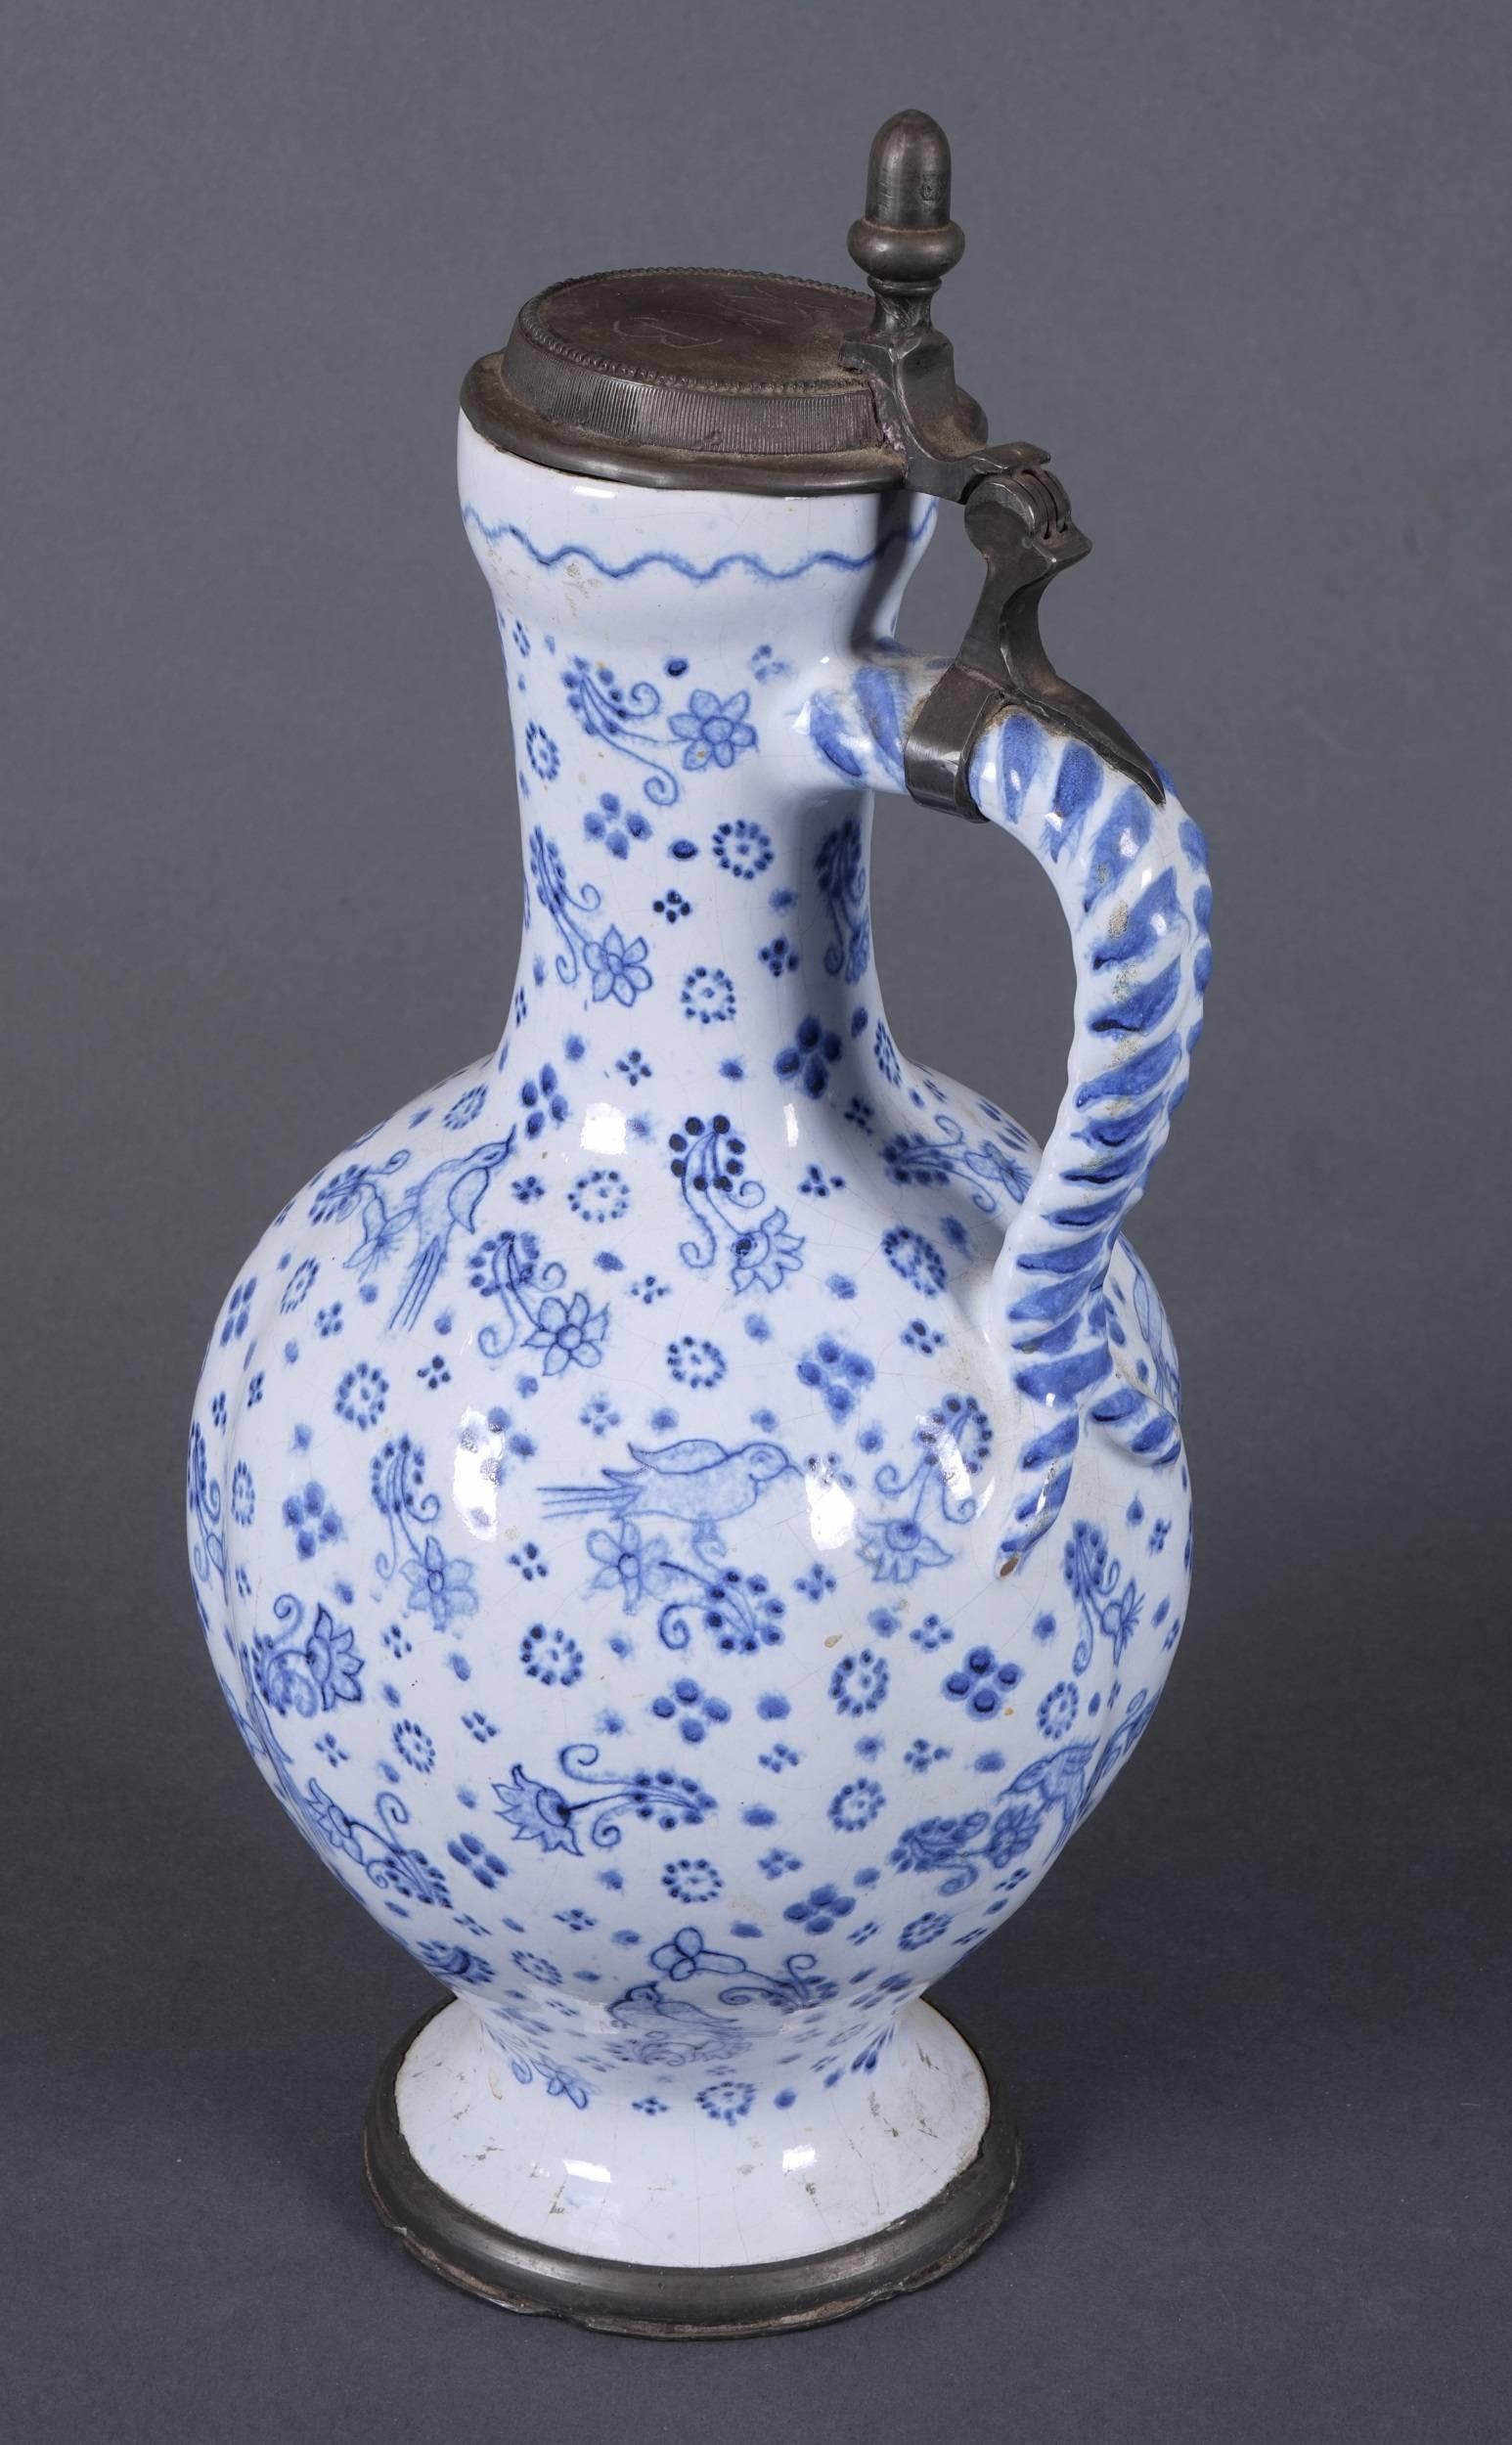 A blue and white pewter-mounted Enghalskrug or ceramic jug, the body decorated with a design of birds and flowers. The hinged cover is embellished with an acorn knop and inscribed 'KMB.'
   